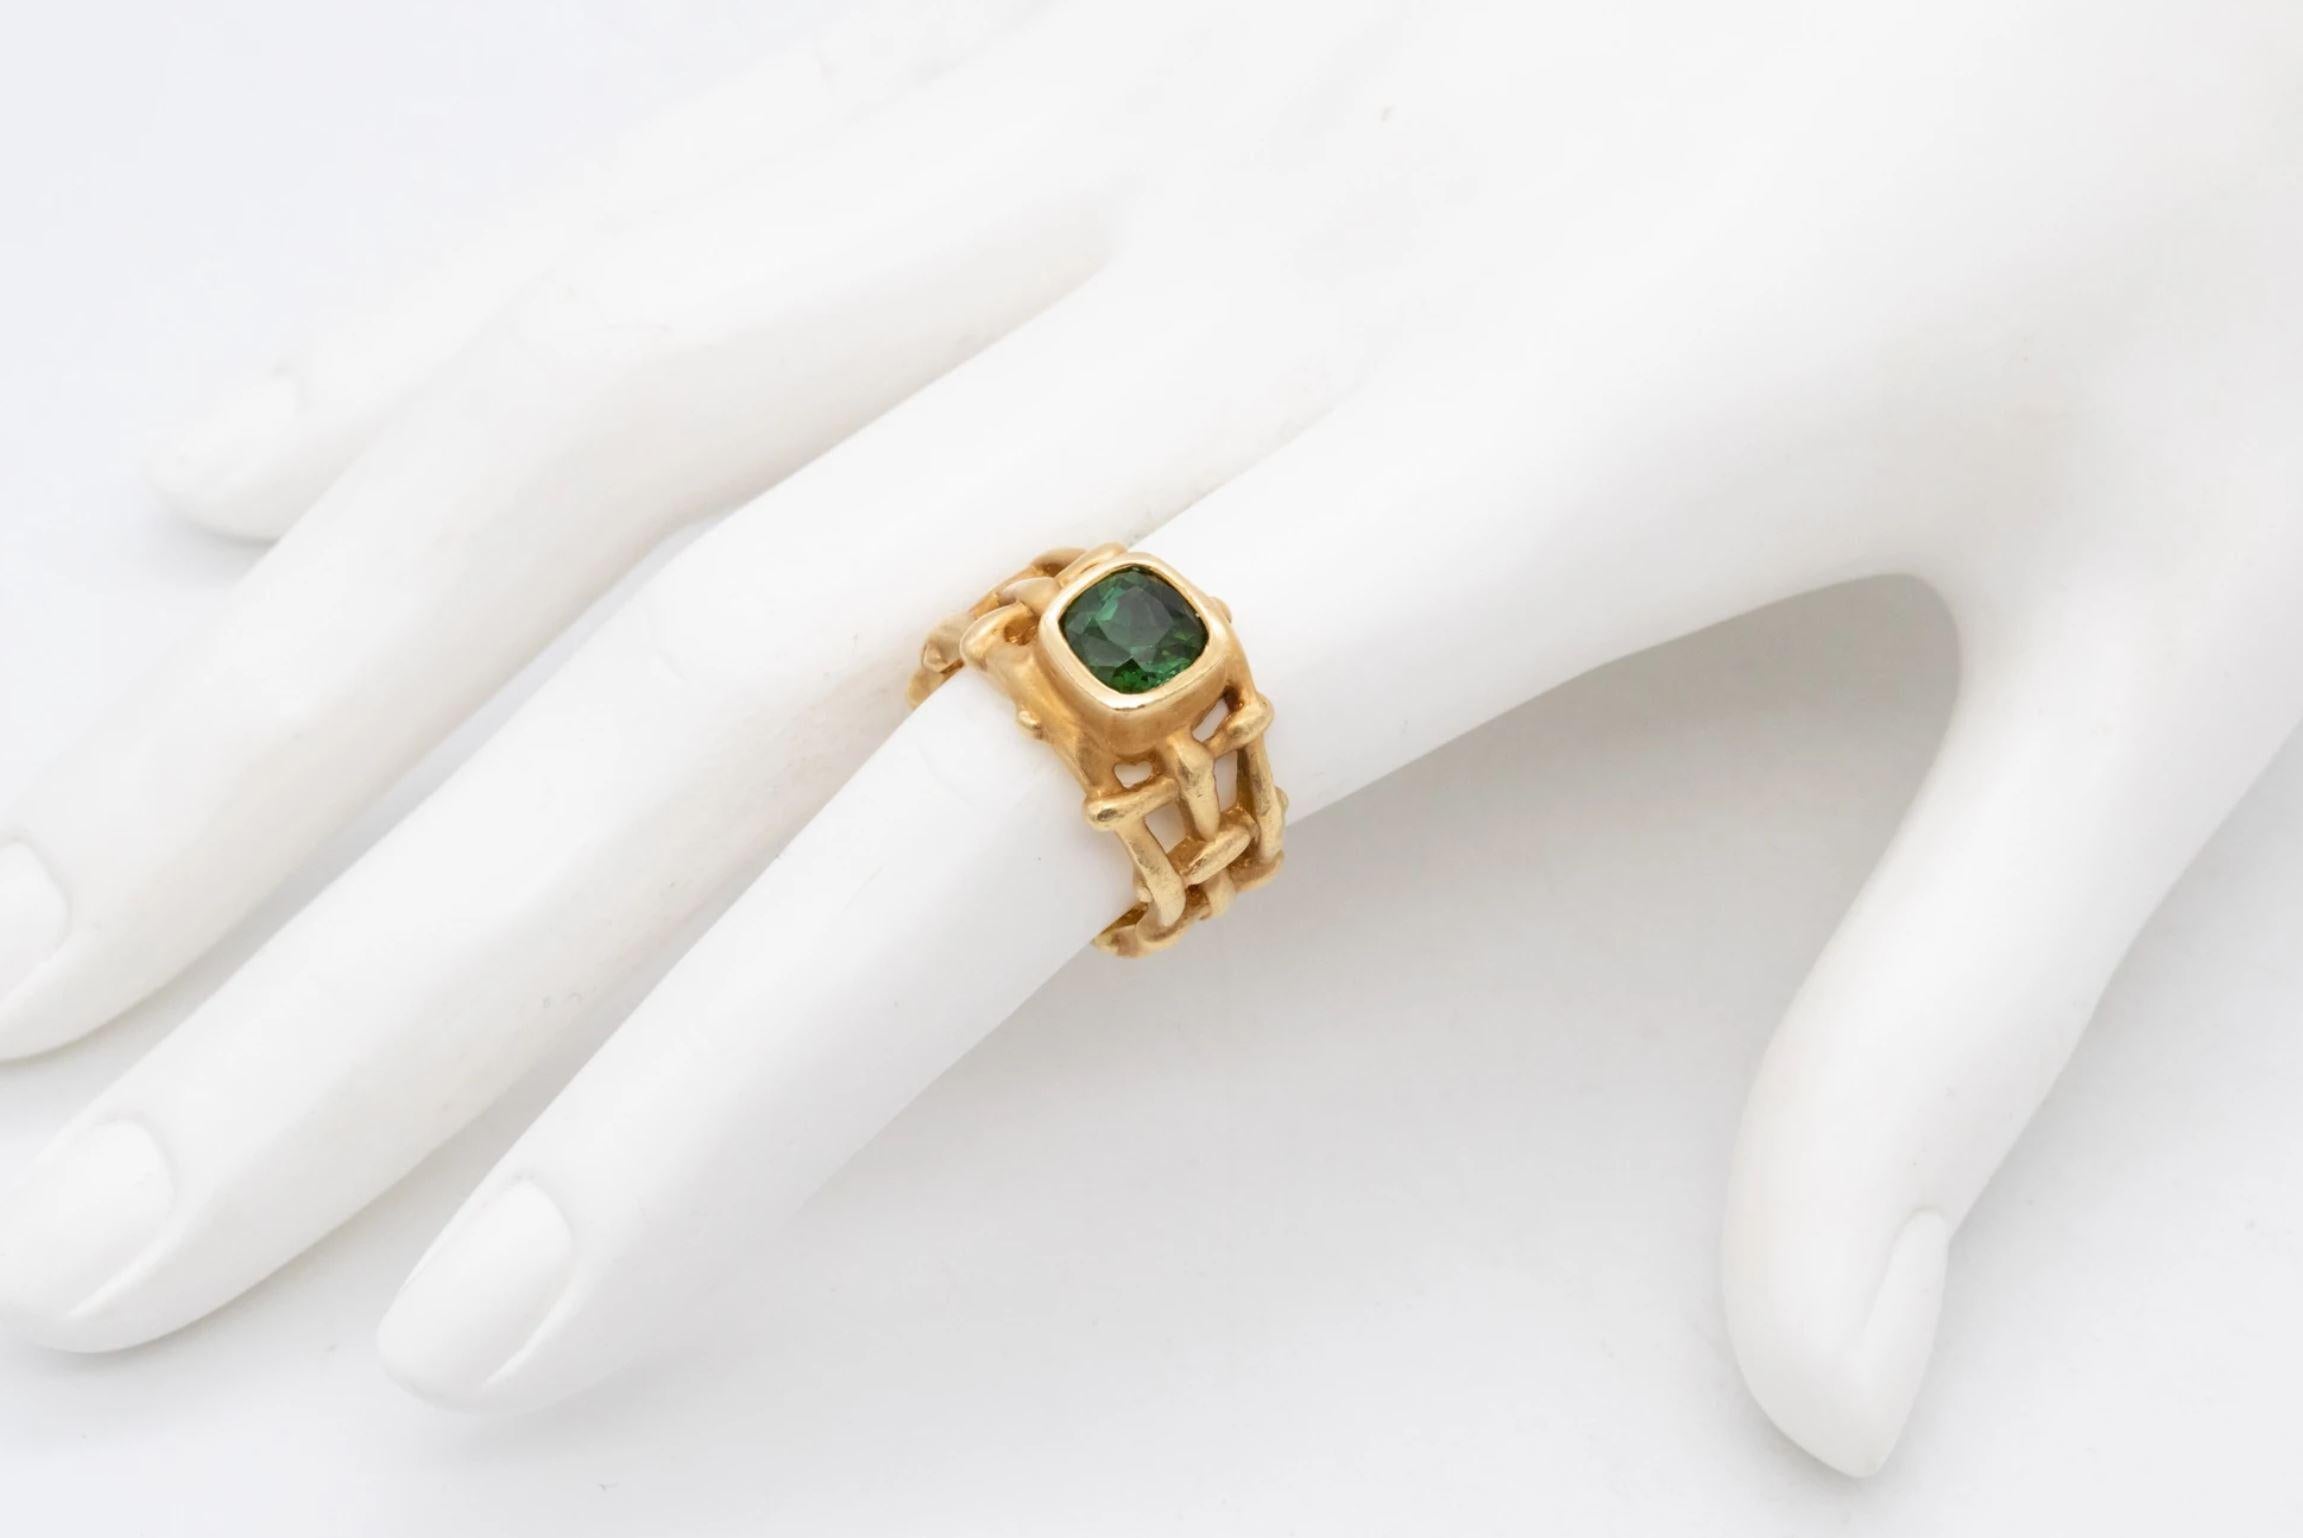 Angela Cummings Studios Rare Cocktail Ring 18Kt Yellow Gold 2.13 Cts Tourmaline For Sale 3